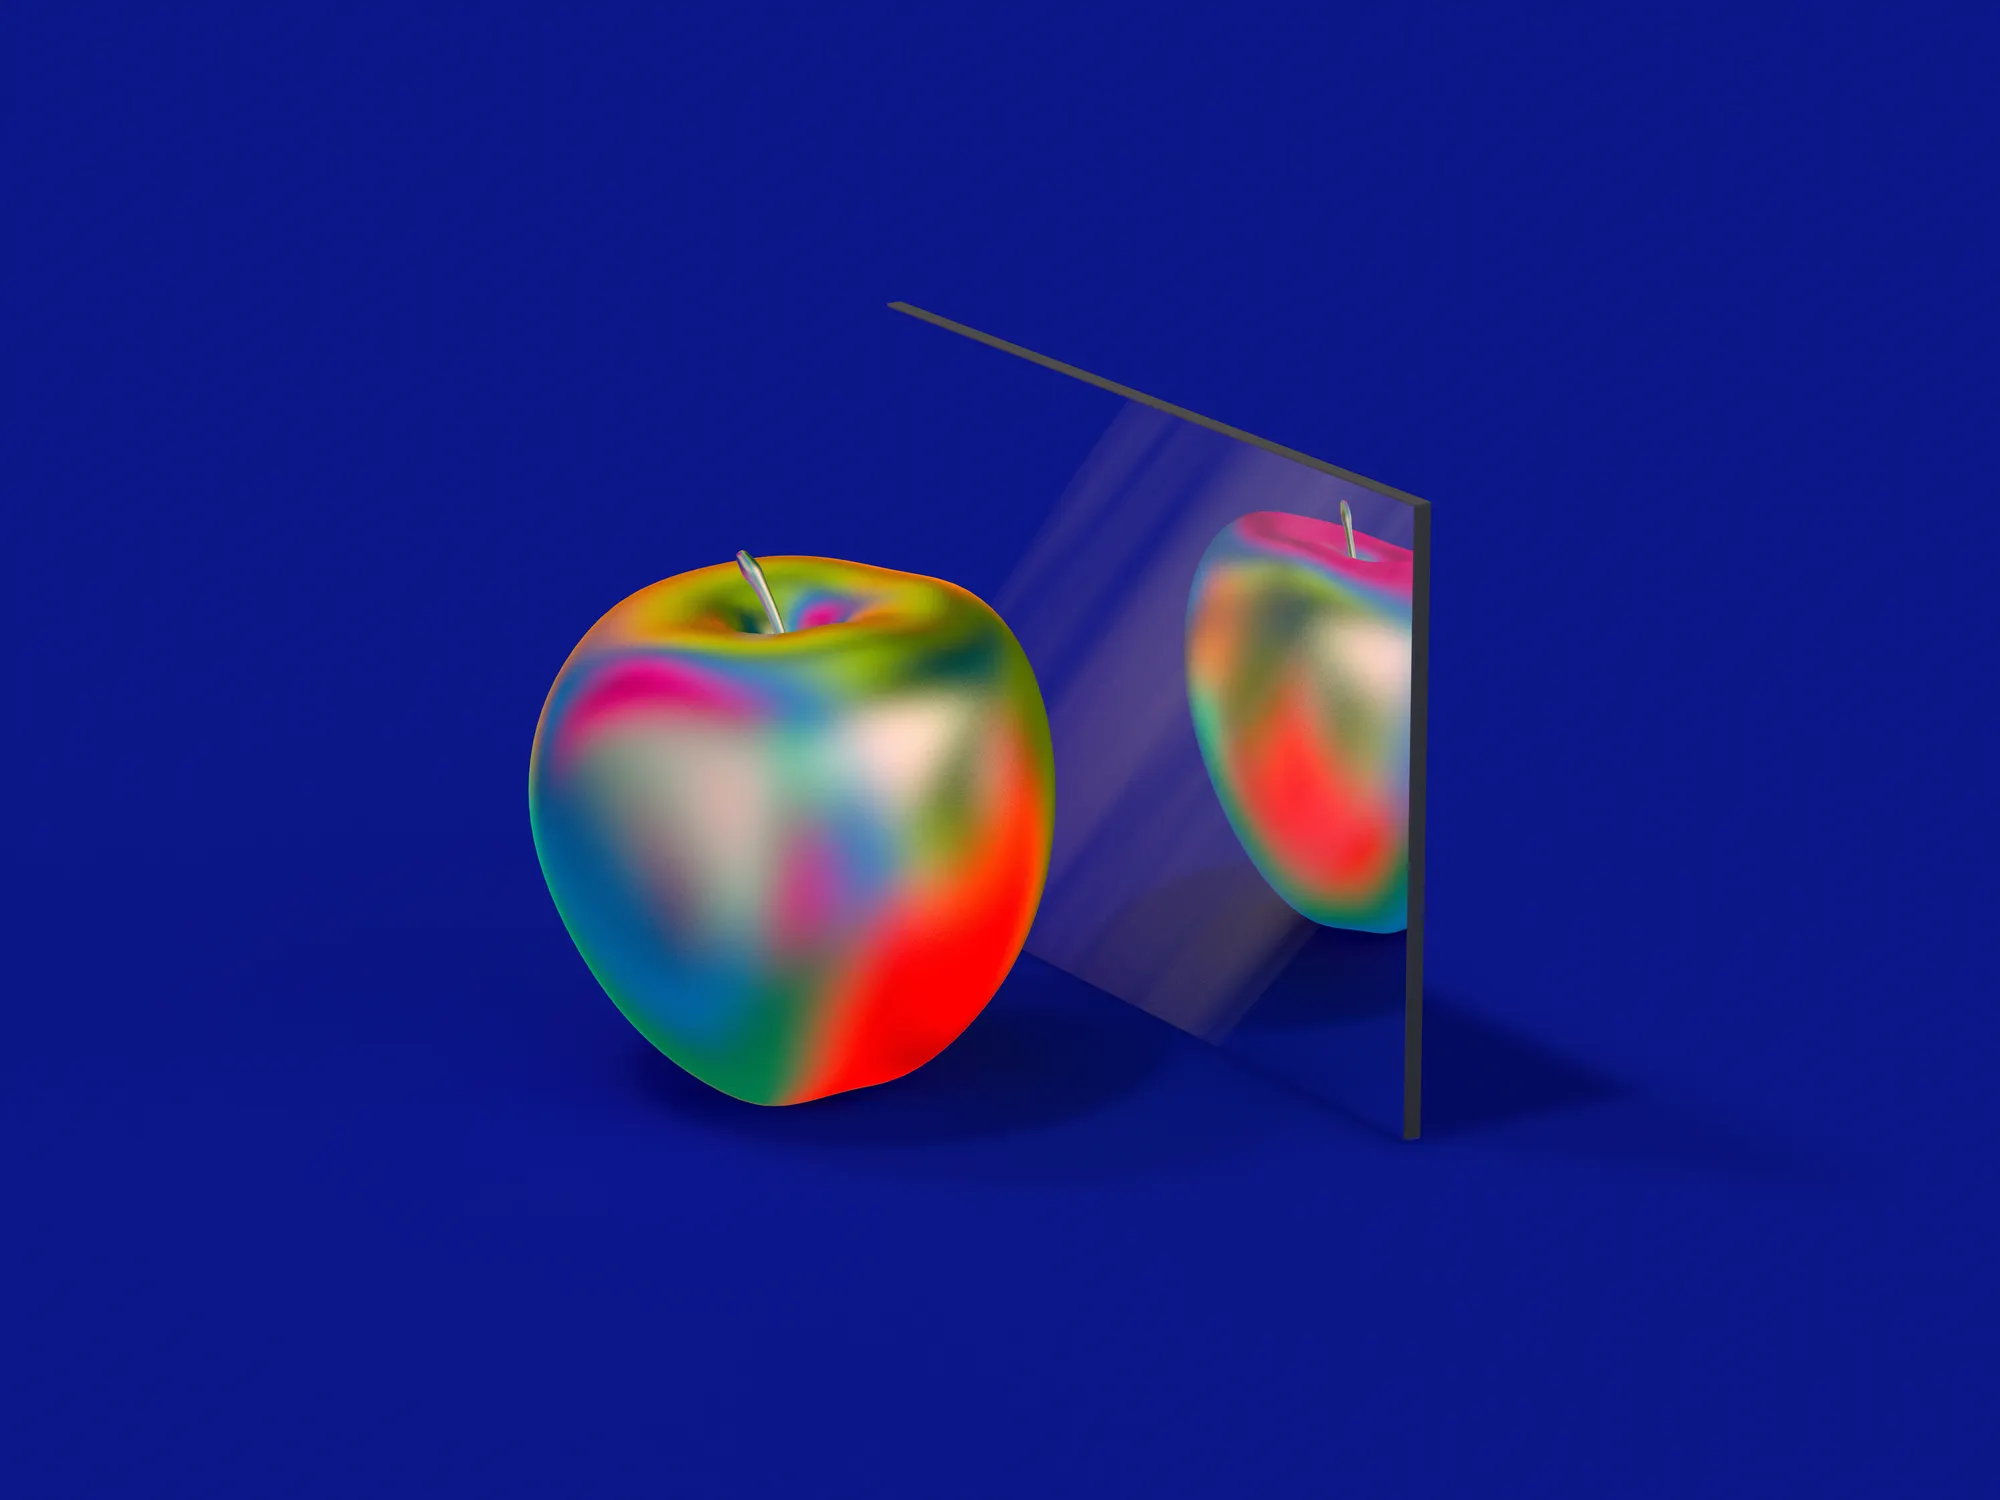 An iridescent rendering of an apple, in front of a mirror, and its reflection on a violet background.